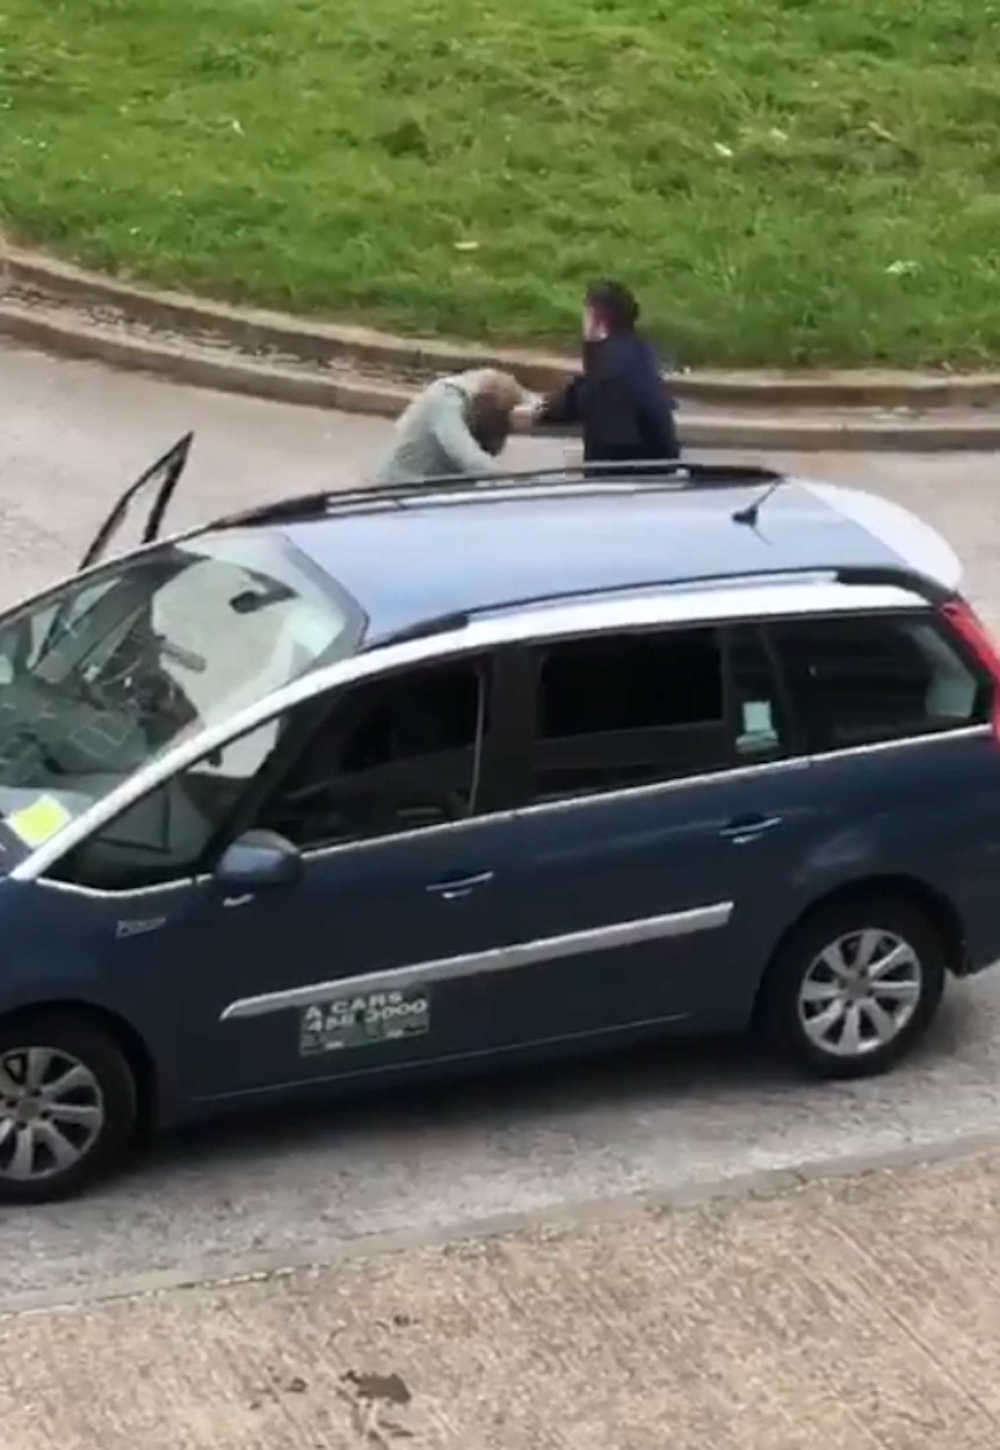 Fight between driver and passenger